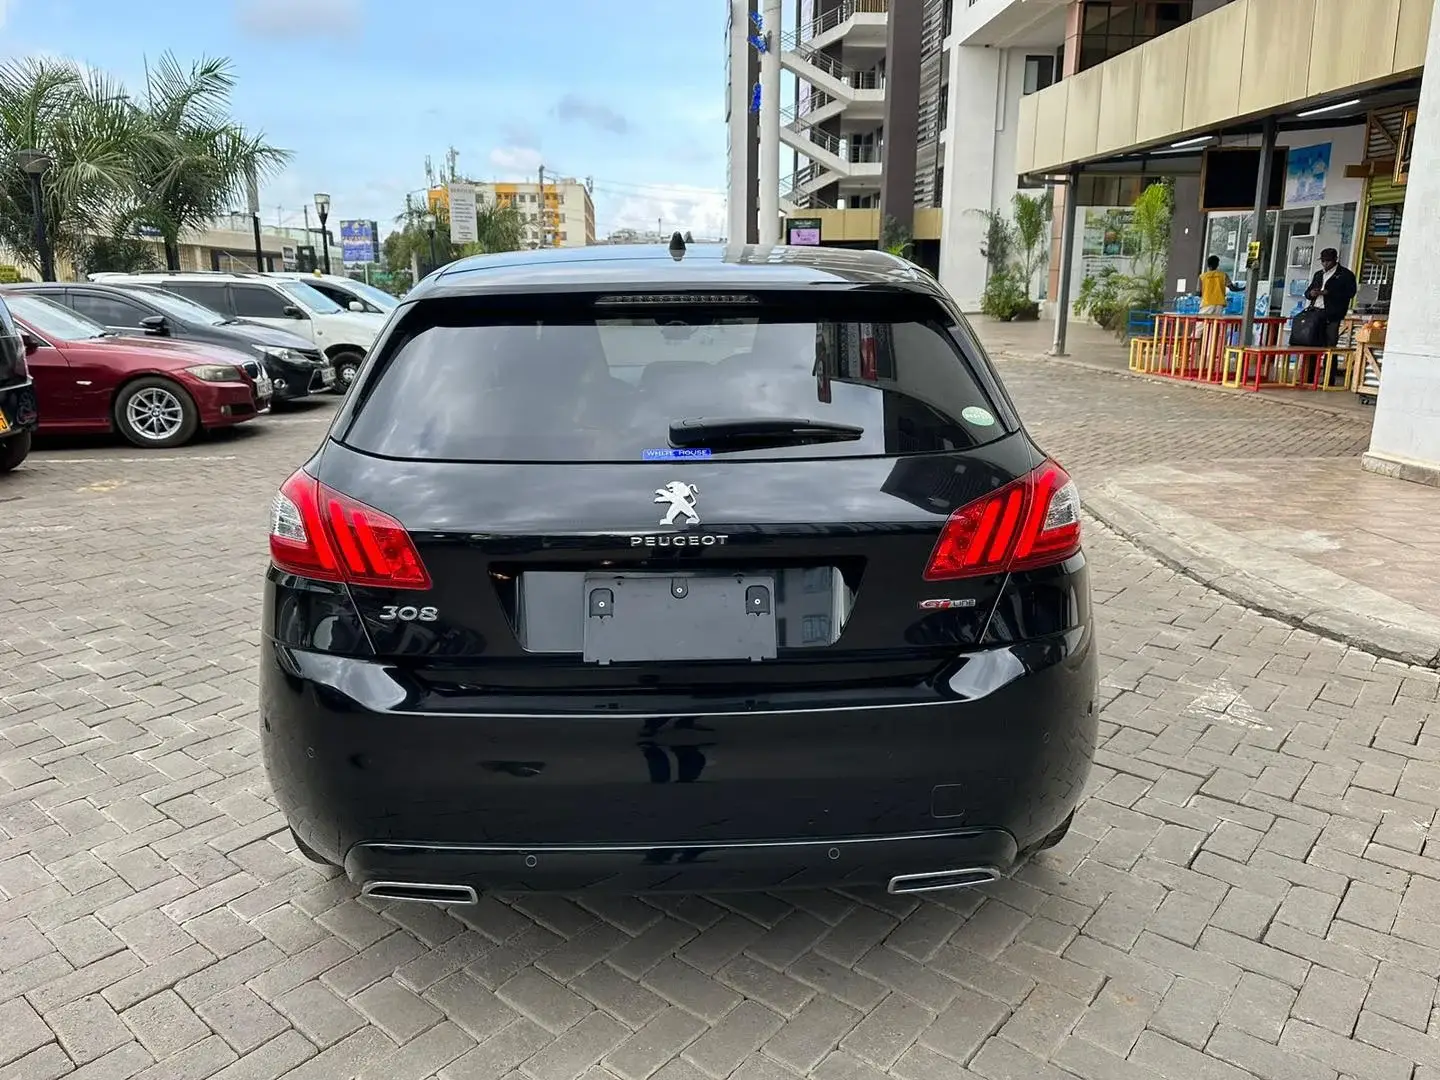 Peugeot 308 for Sale in Mombasa

